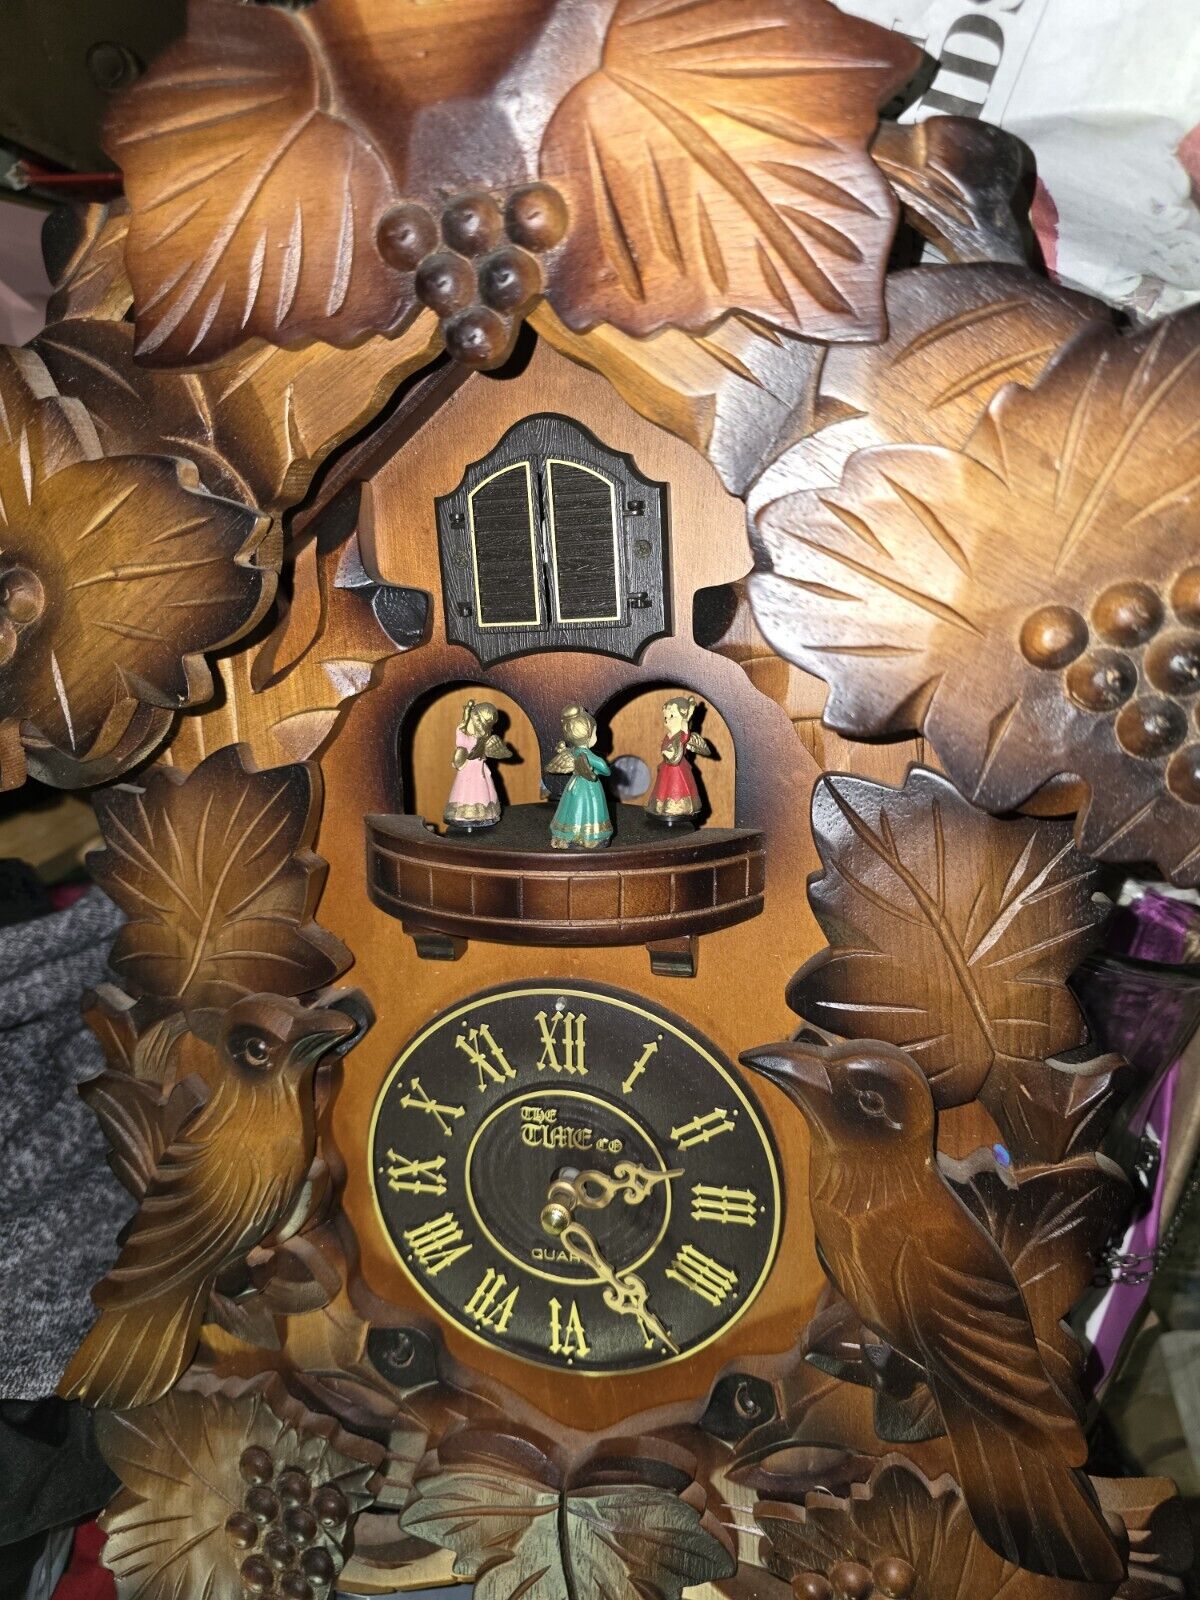 The Time Company Quartz Chalet Cuckoo Wooden Clock Chimes With Bird. READ...